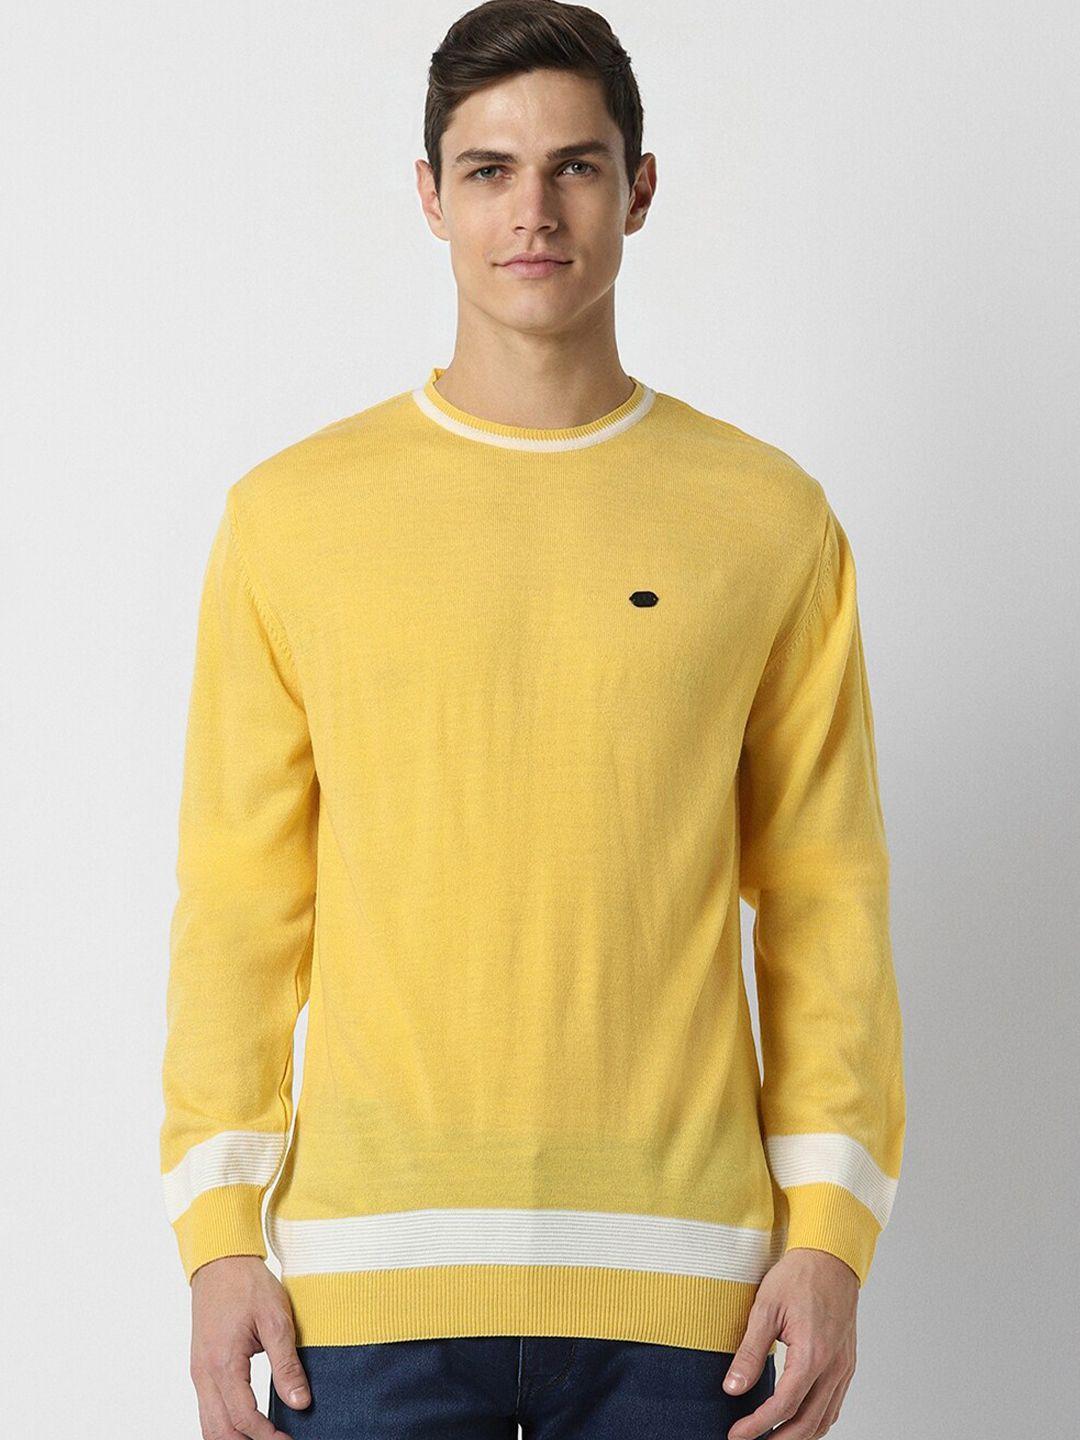 peter england casuals round neck pure acrylic pullover